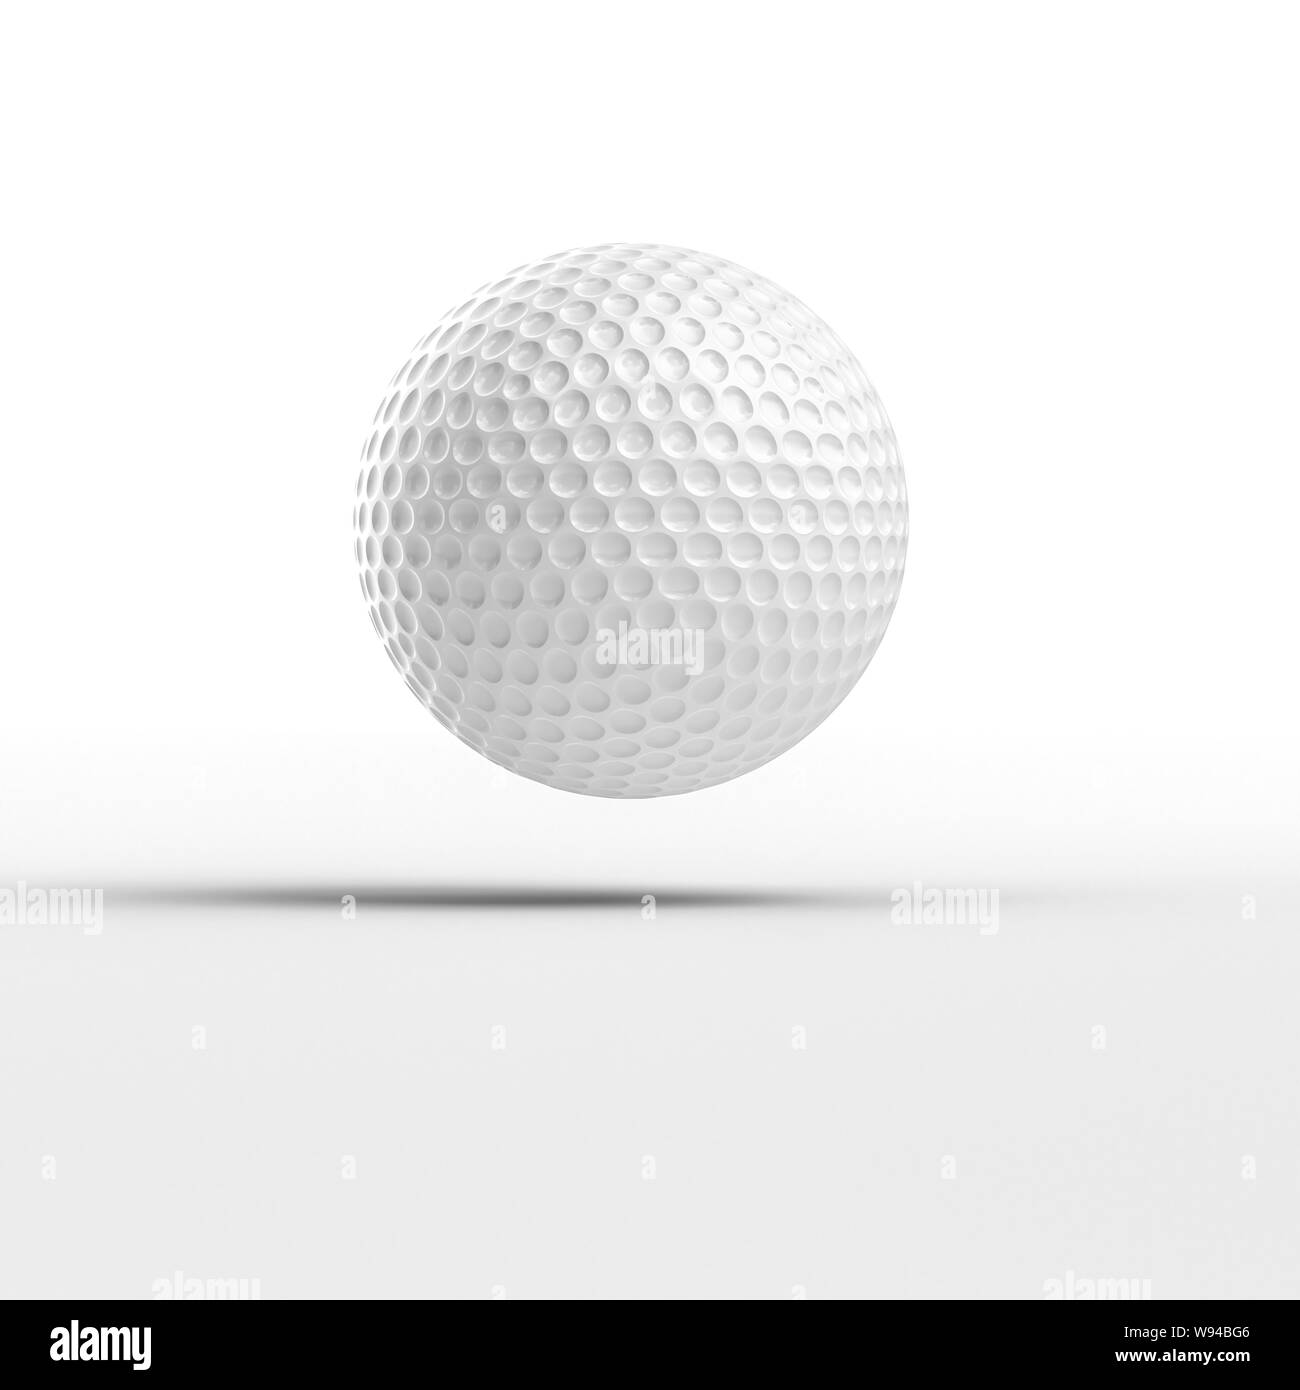 3d render image of a golf ball on a white background. Sport concept. Stock Photo